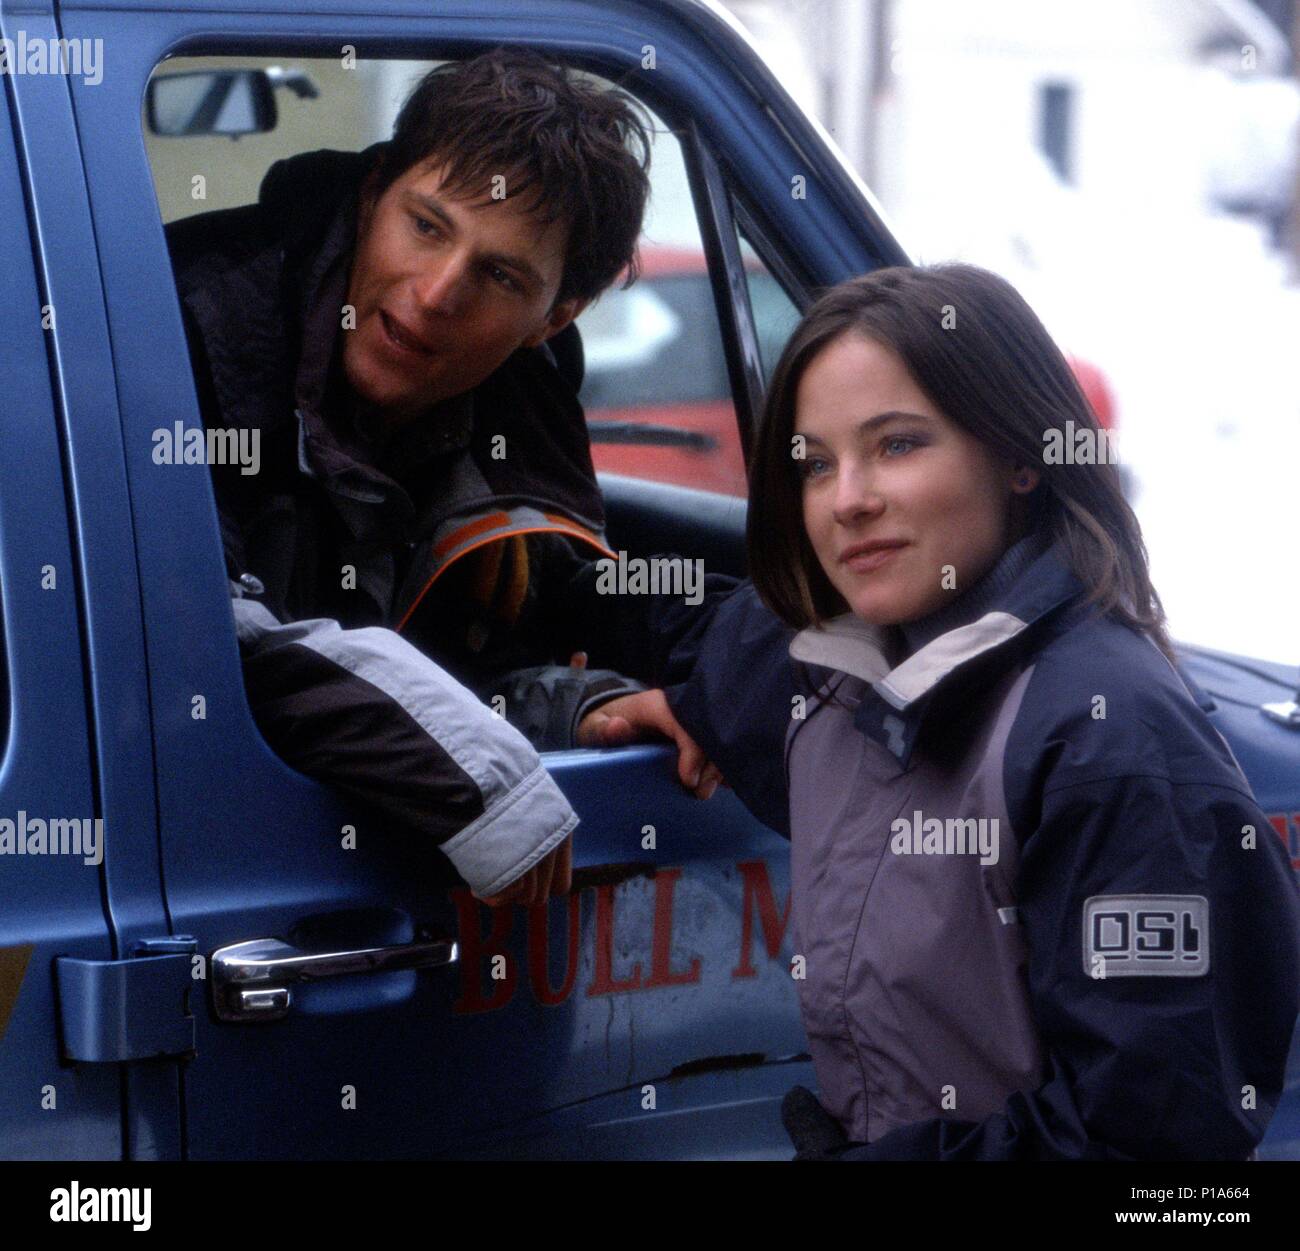 Original Film Title: OUT COLD.  English Title: OUT COLD.  Film Director: THE MALLOYS; BRENDAN MALLOY; EMMETT MALLOY.  Year: 2001.  Stars: CAROLINE DHAVERNAS. Credit: TOUCHSTONE PICTURES / Album Stock Photo